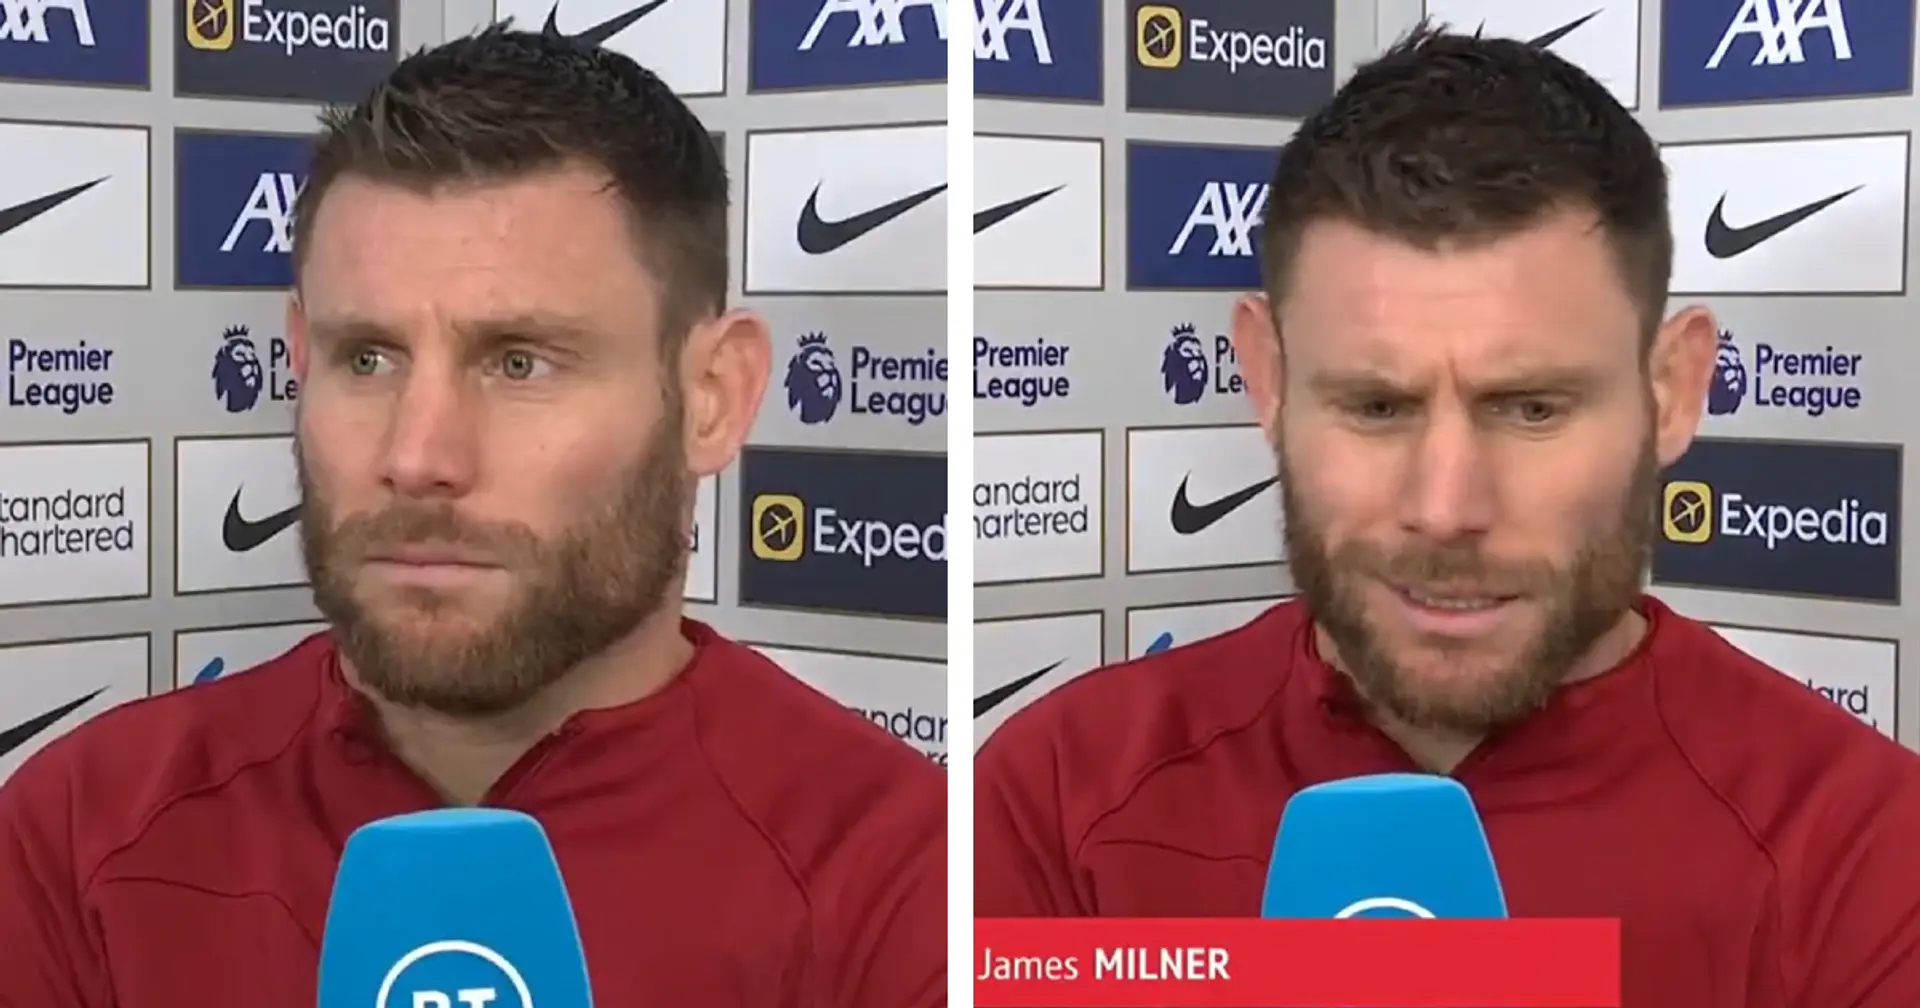 'You saw the fight. We had chances to win': Milner on Chelsea draw